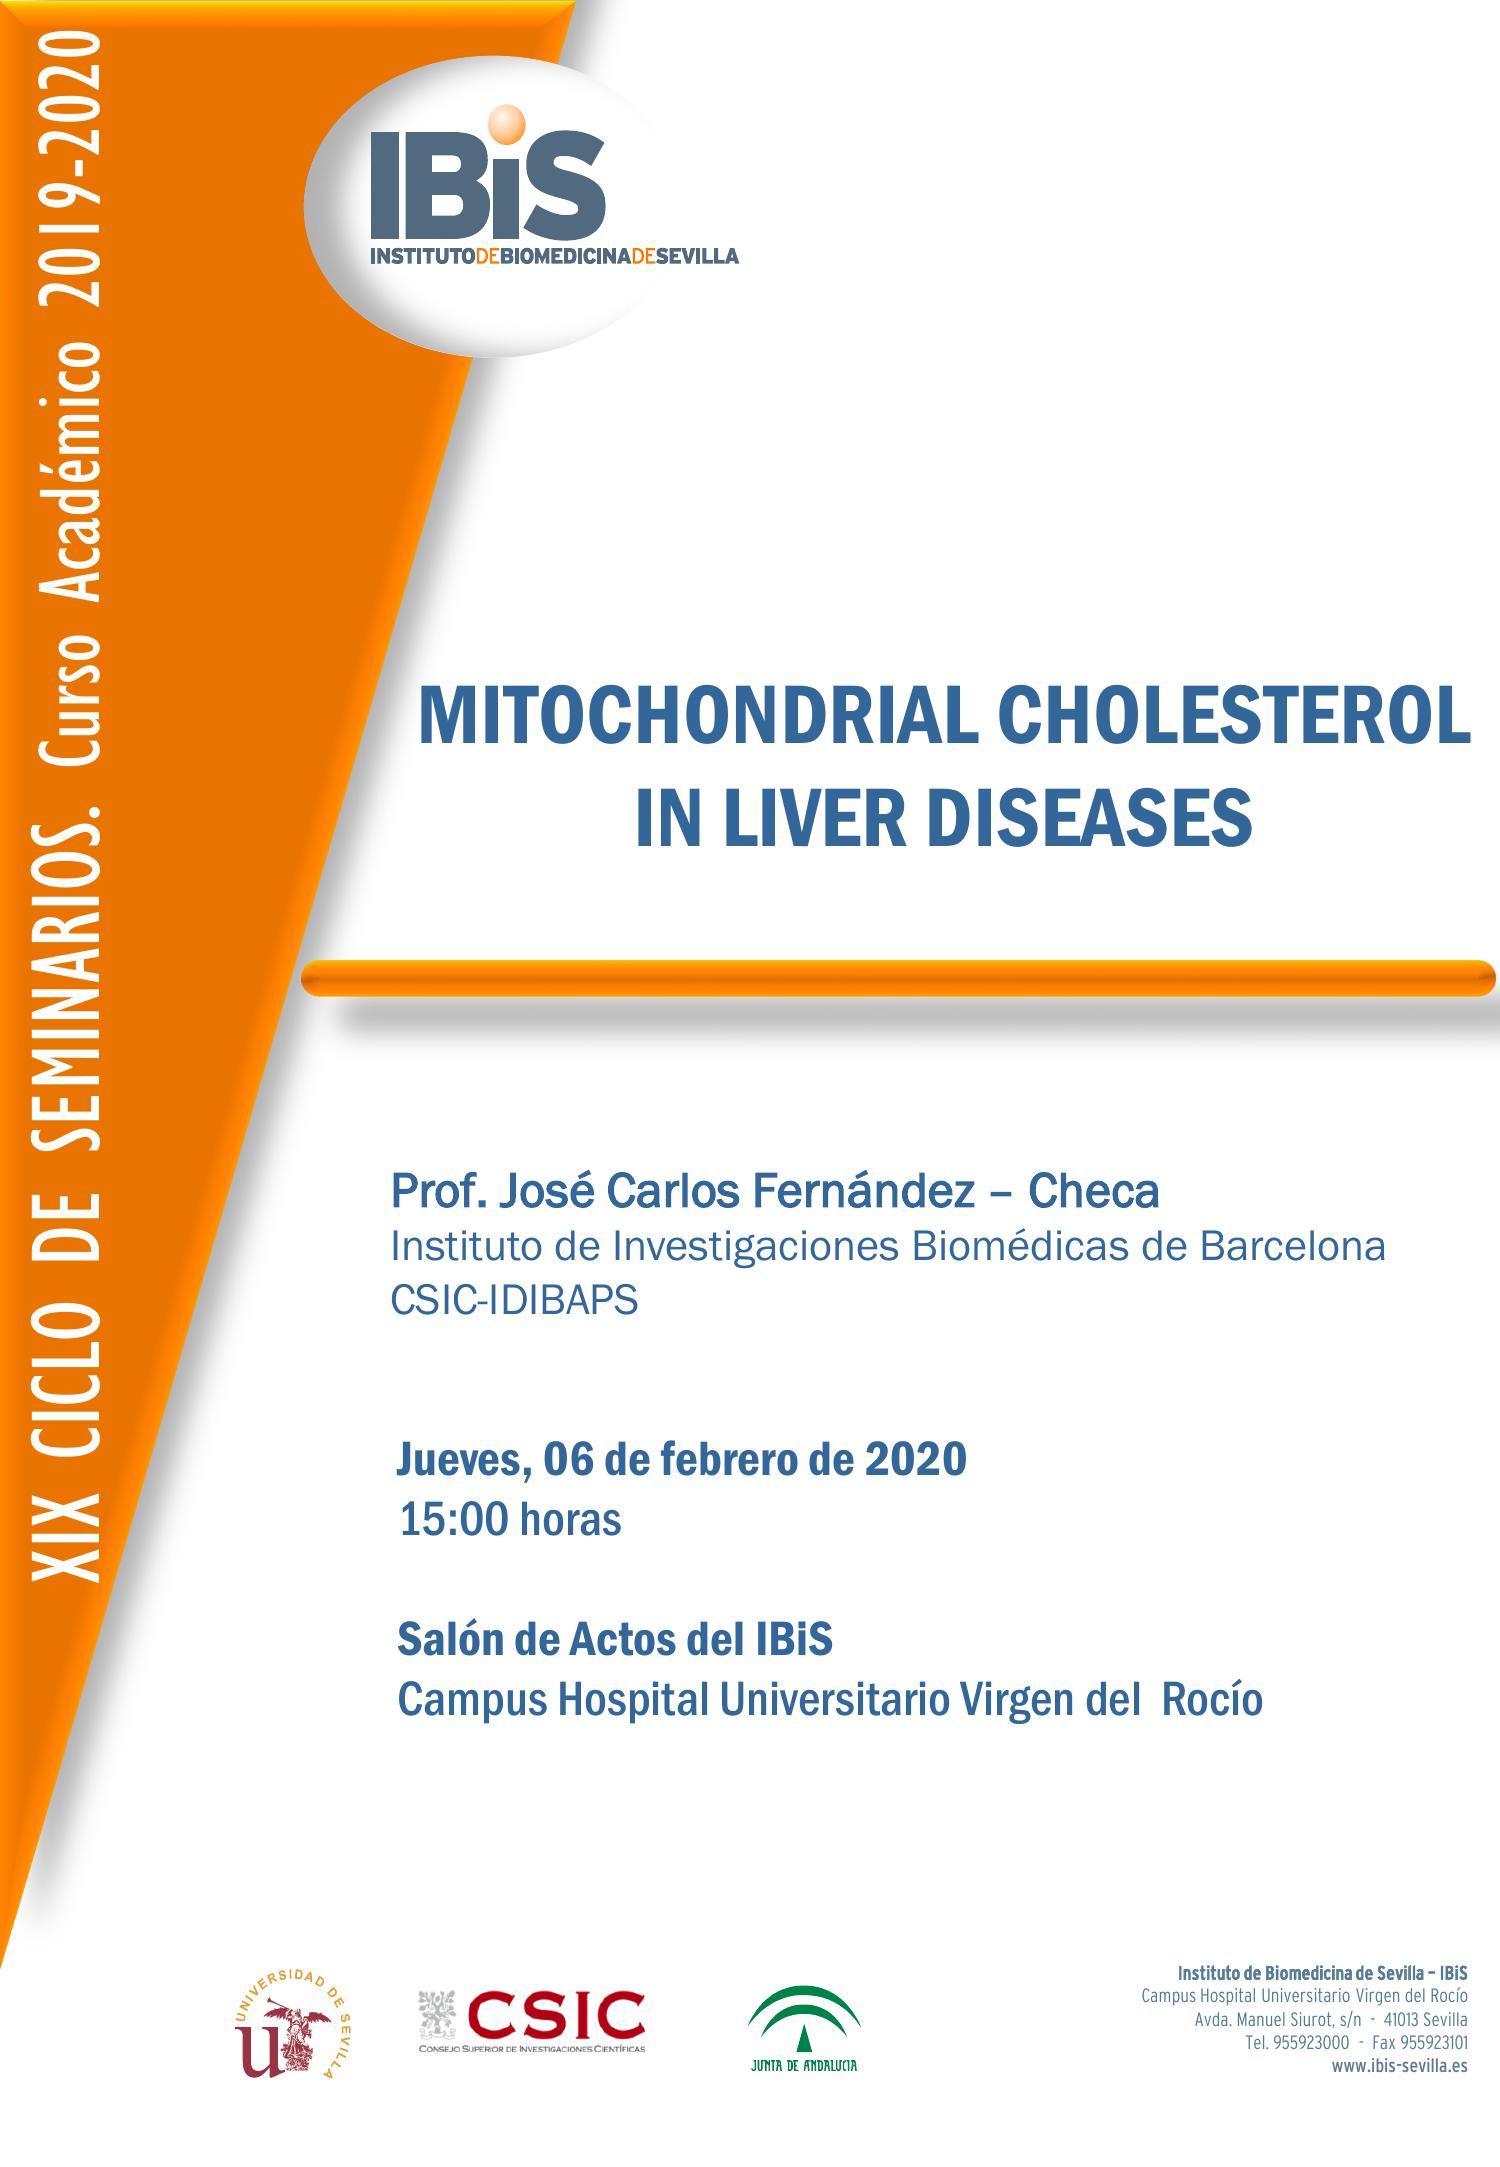 Poster: MITOCHONDRIAL CHOLESTEROL IN LIVER DISEASES